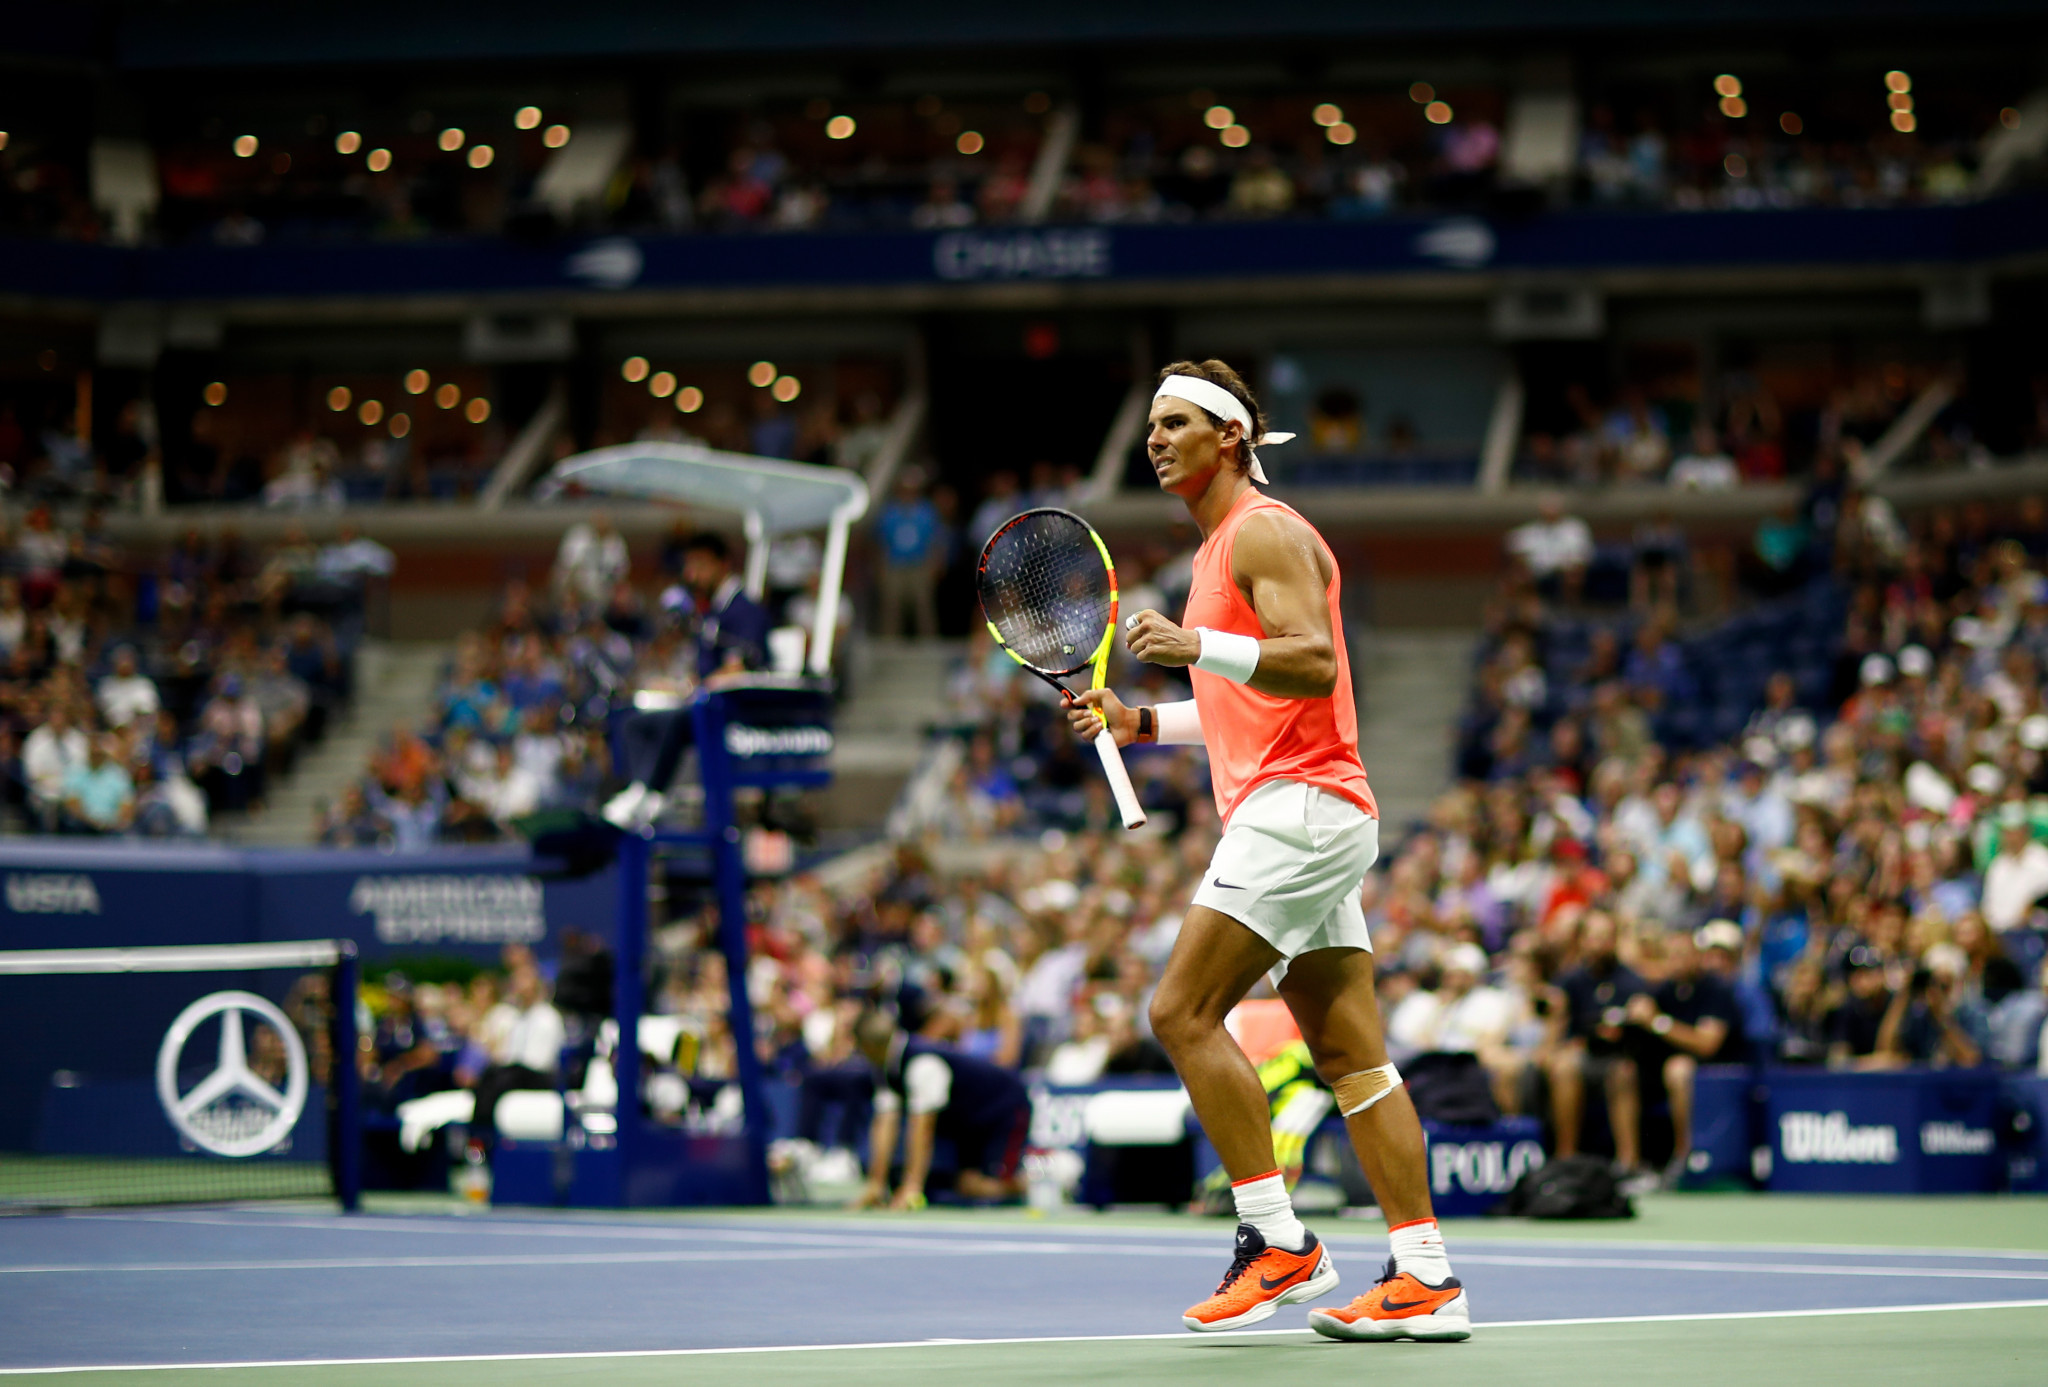 Defending men's champion Rafael Nadal booked his place in the fourth round ©Getty Images